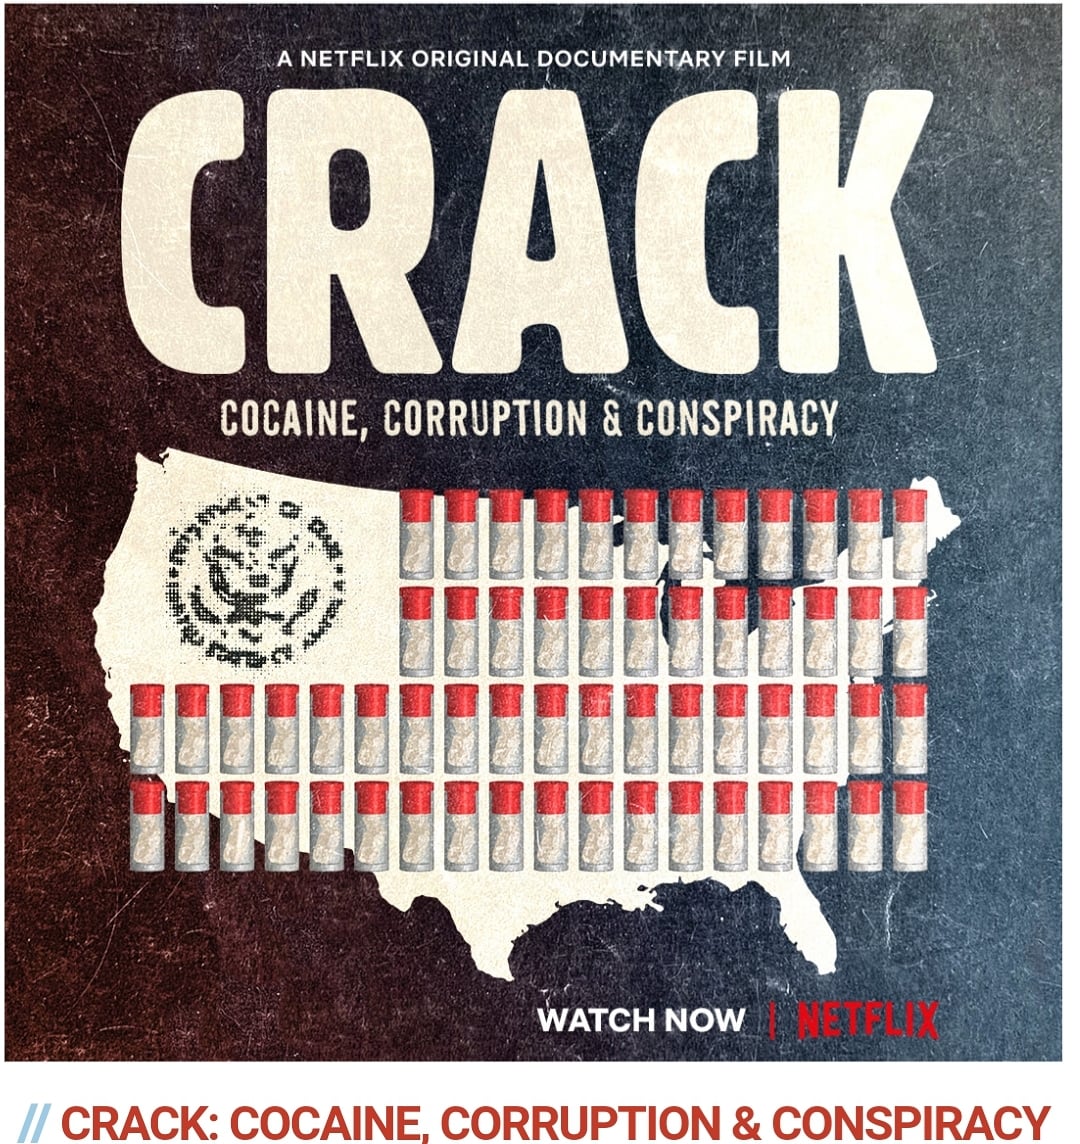 Now Streaming @NetflixFilm
Crack: Cocaine, Corruption & Conspiracy.
Award-winning doc filmmaker @StanleyNelson1 is back!.

In the early 1980s, the crack epidemic tore through America’s inner cities like a tsunami, ravaging all in its wake. 

https://t.co/gCvbCJVrDi https://t.co/ZtZv0c8tul